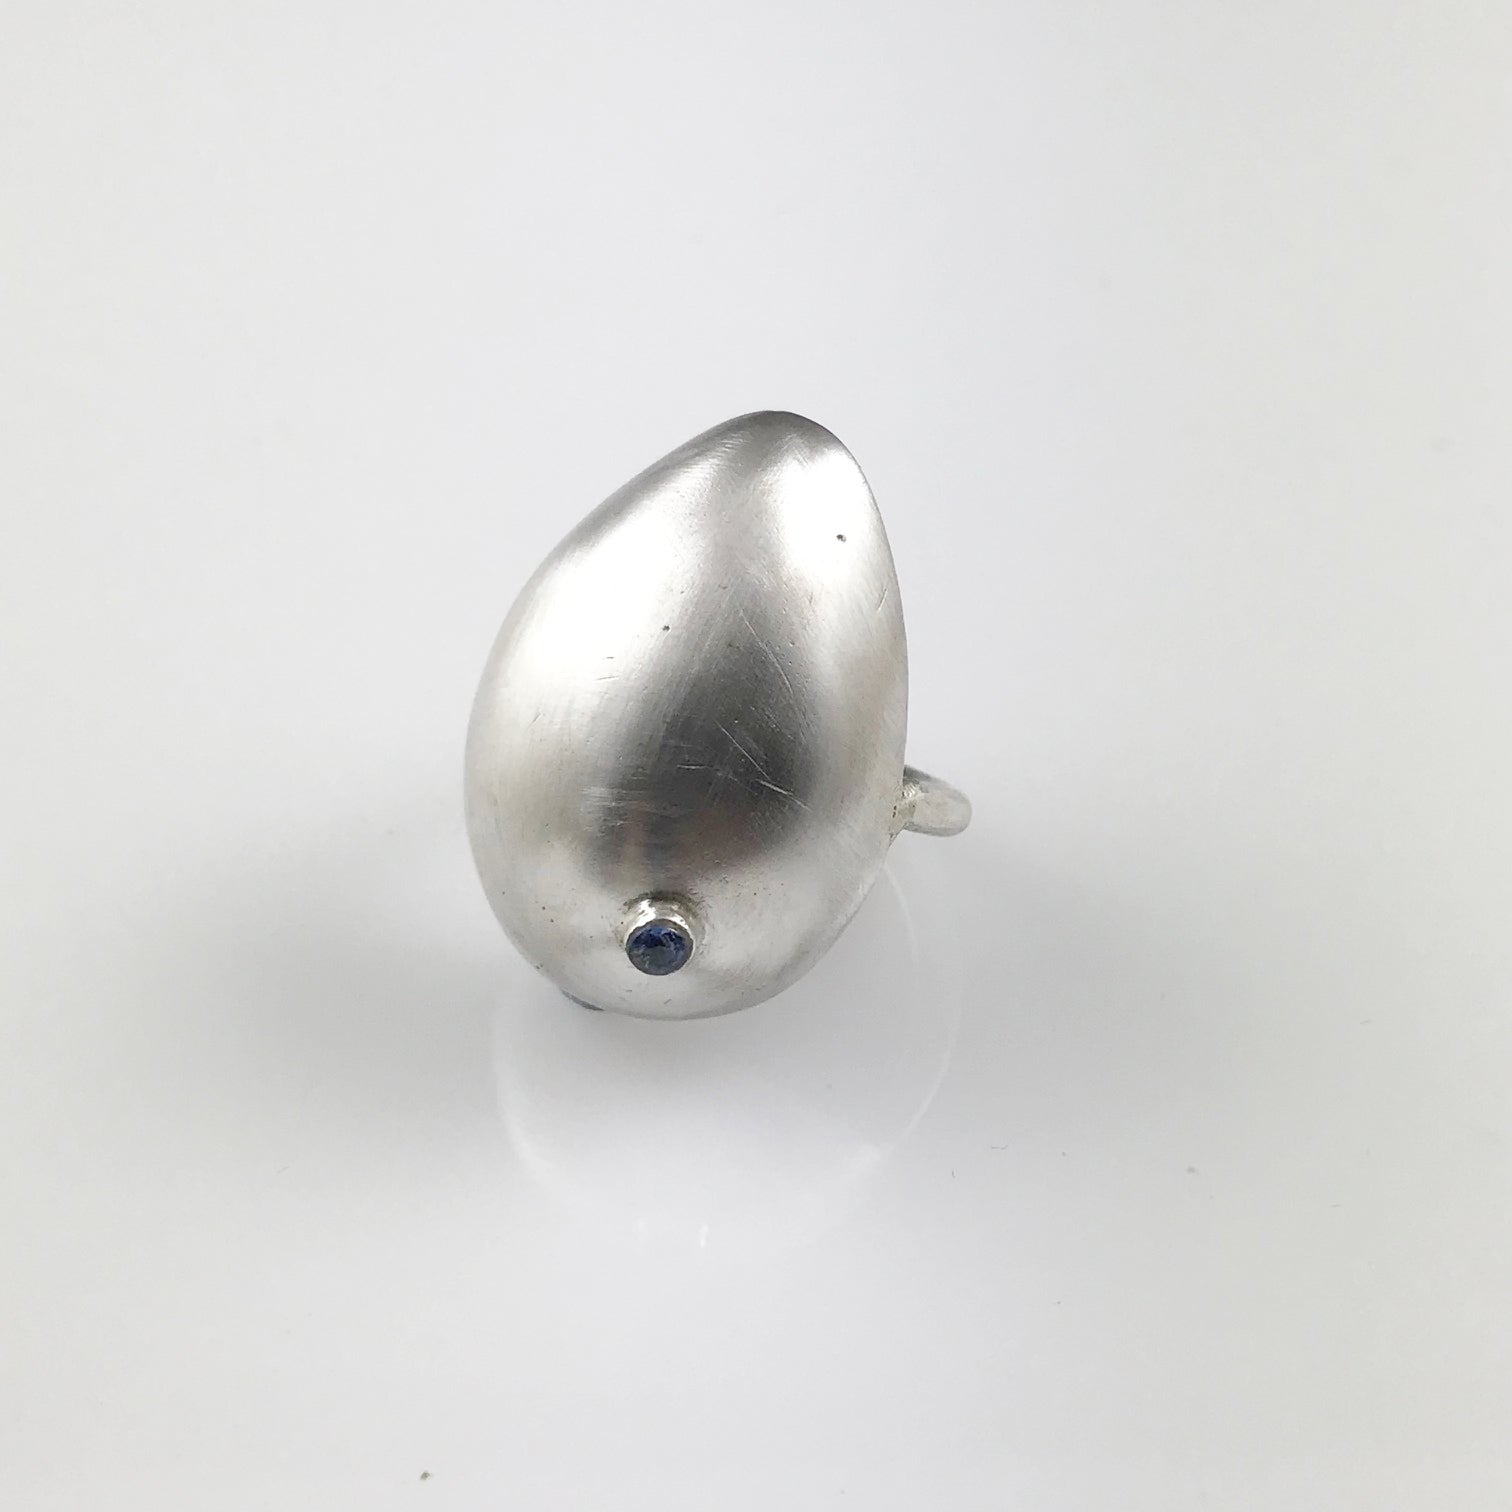 3cm silver egg ring with blue sapphire